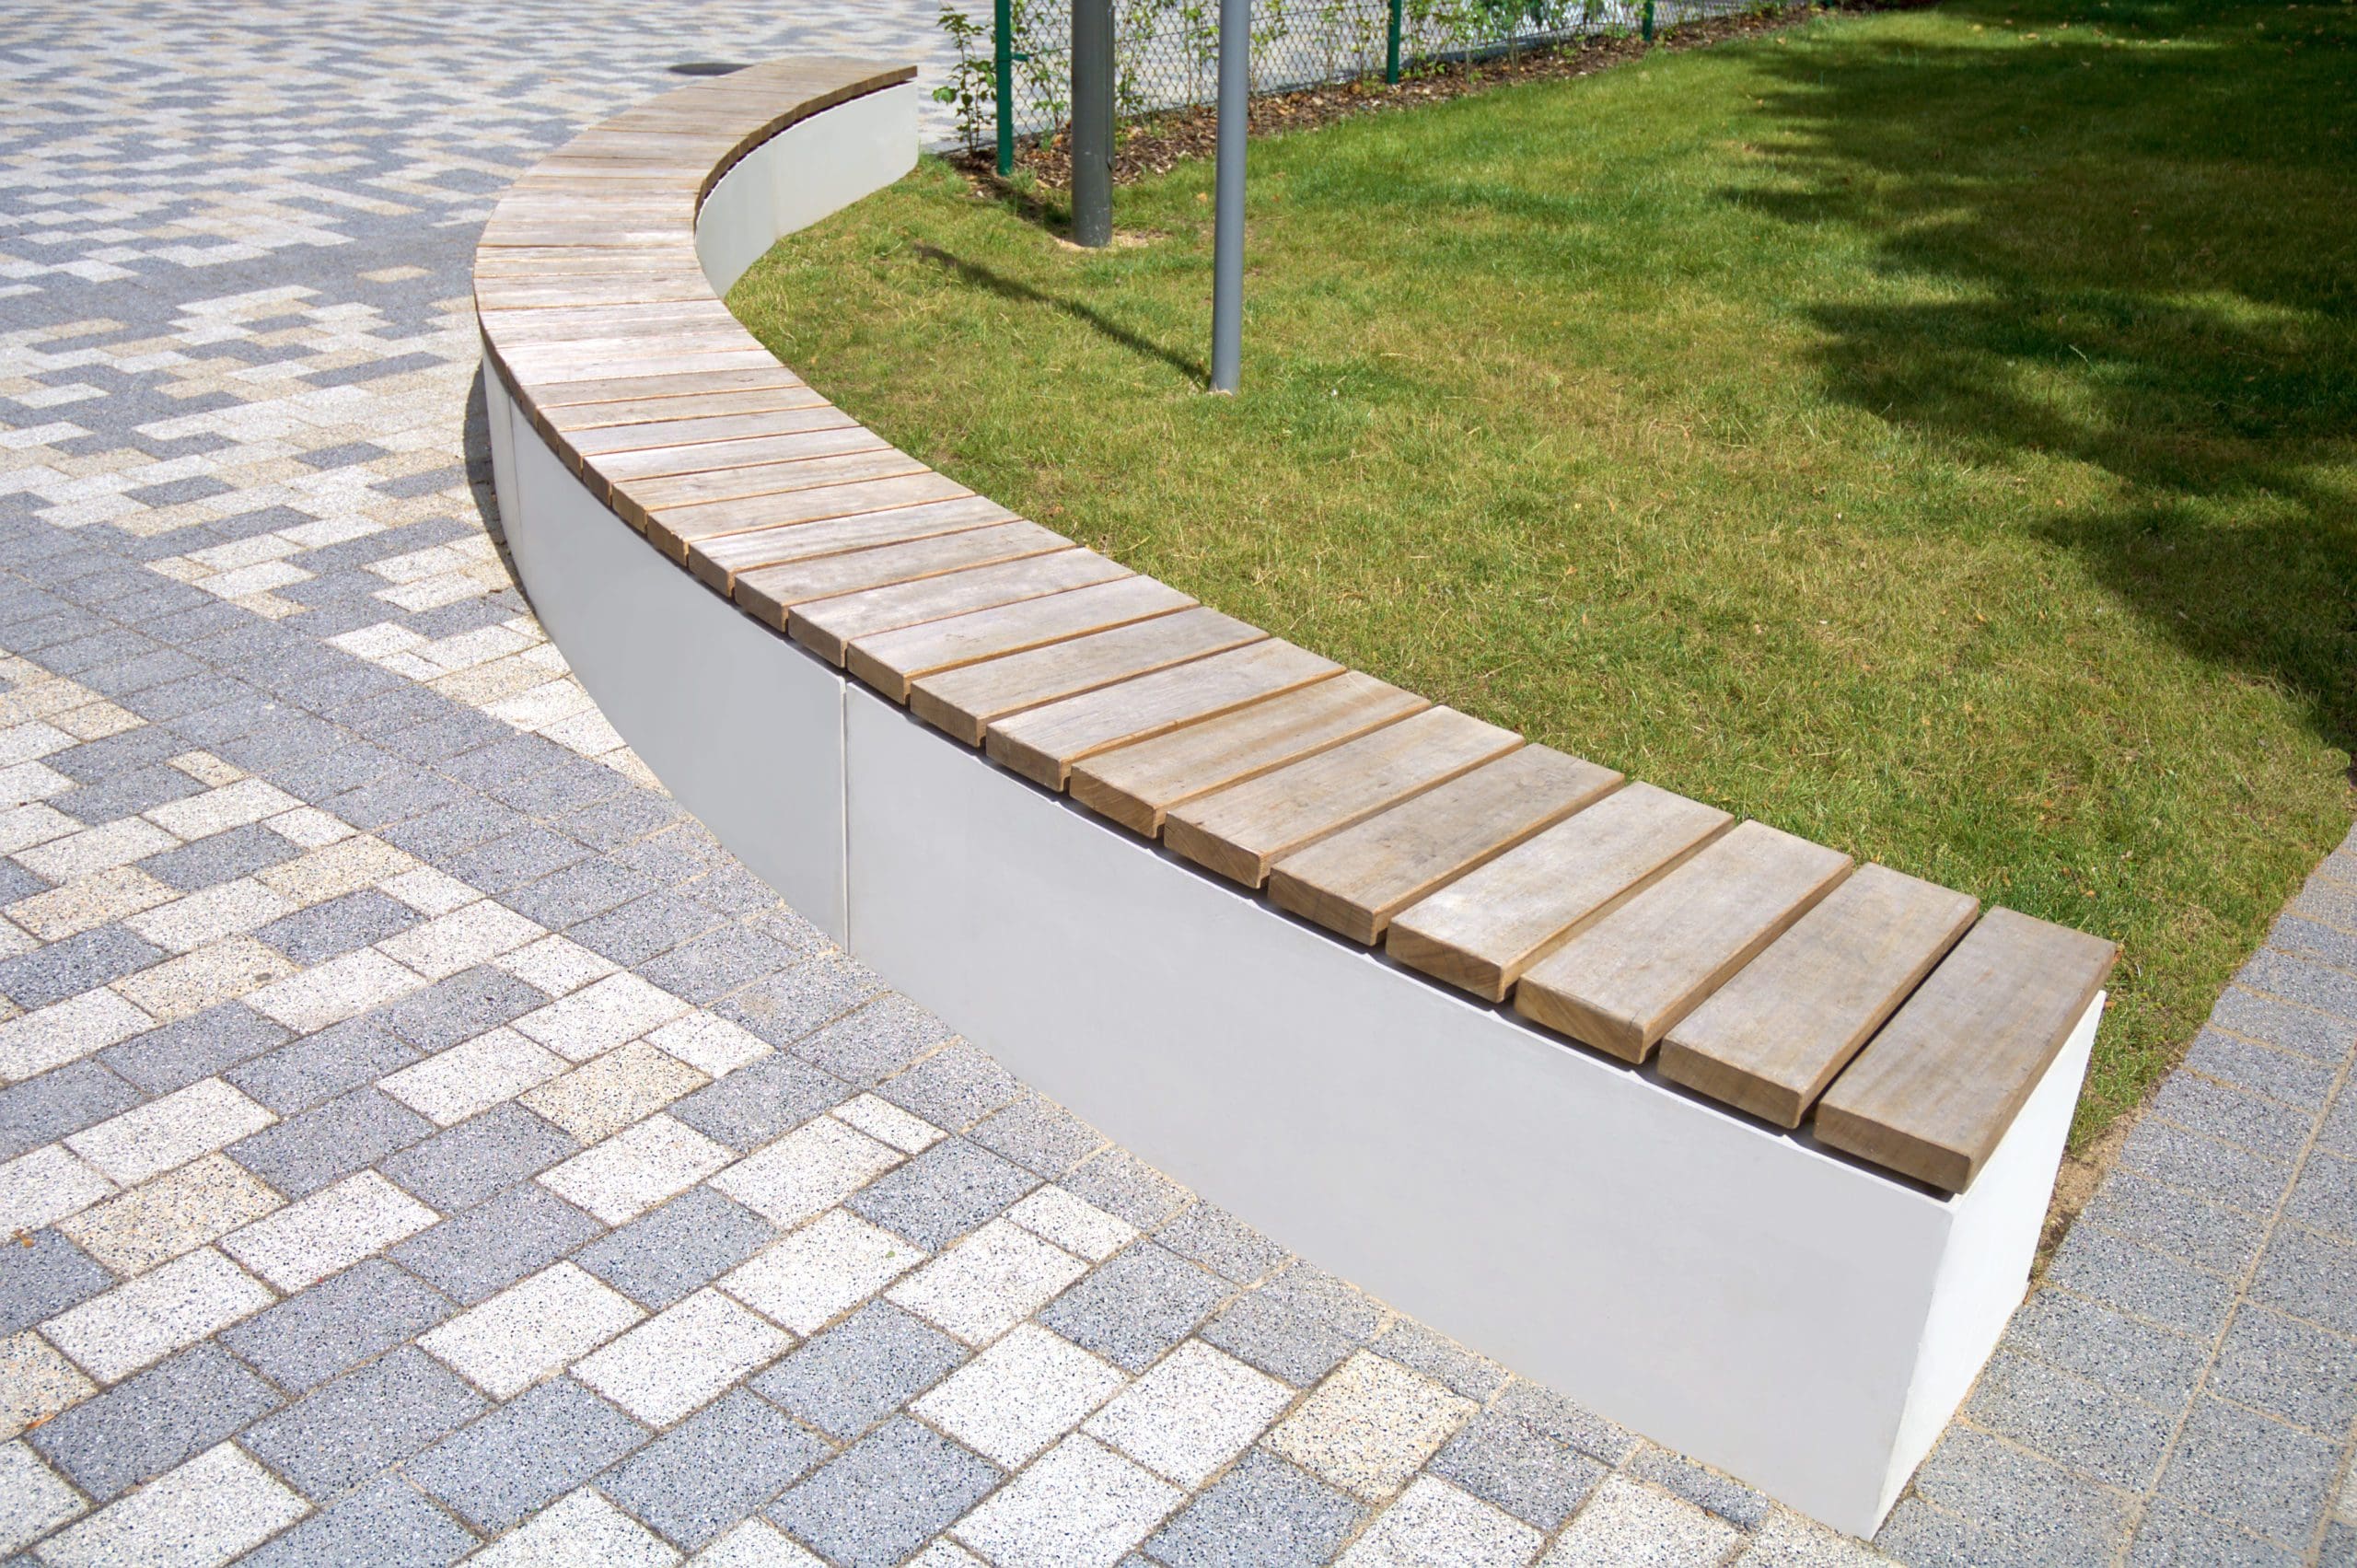 Curved line of concrete rectangle benches with wooden slats on top